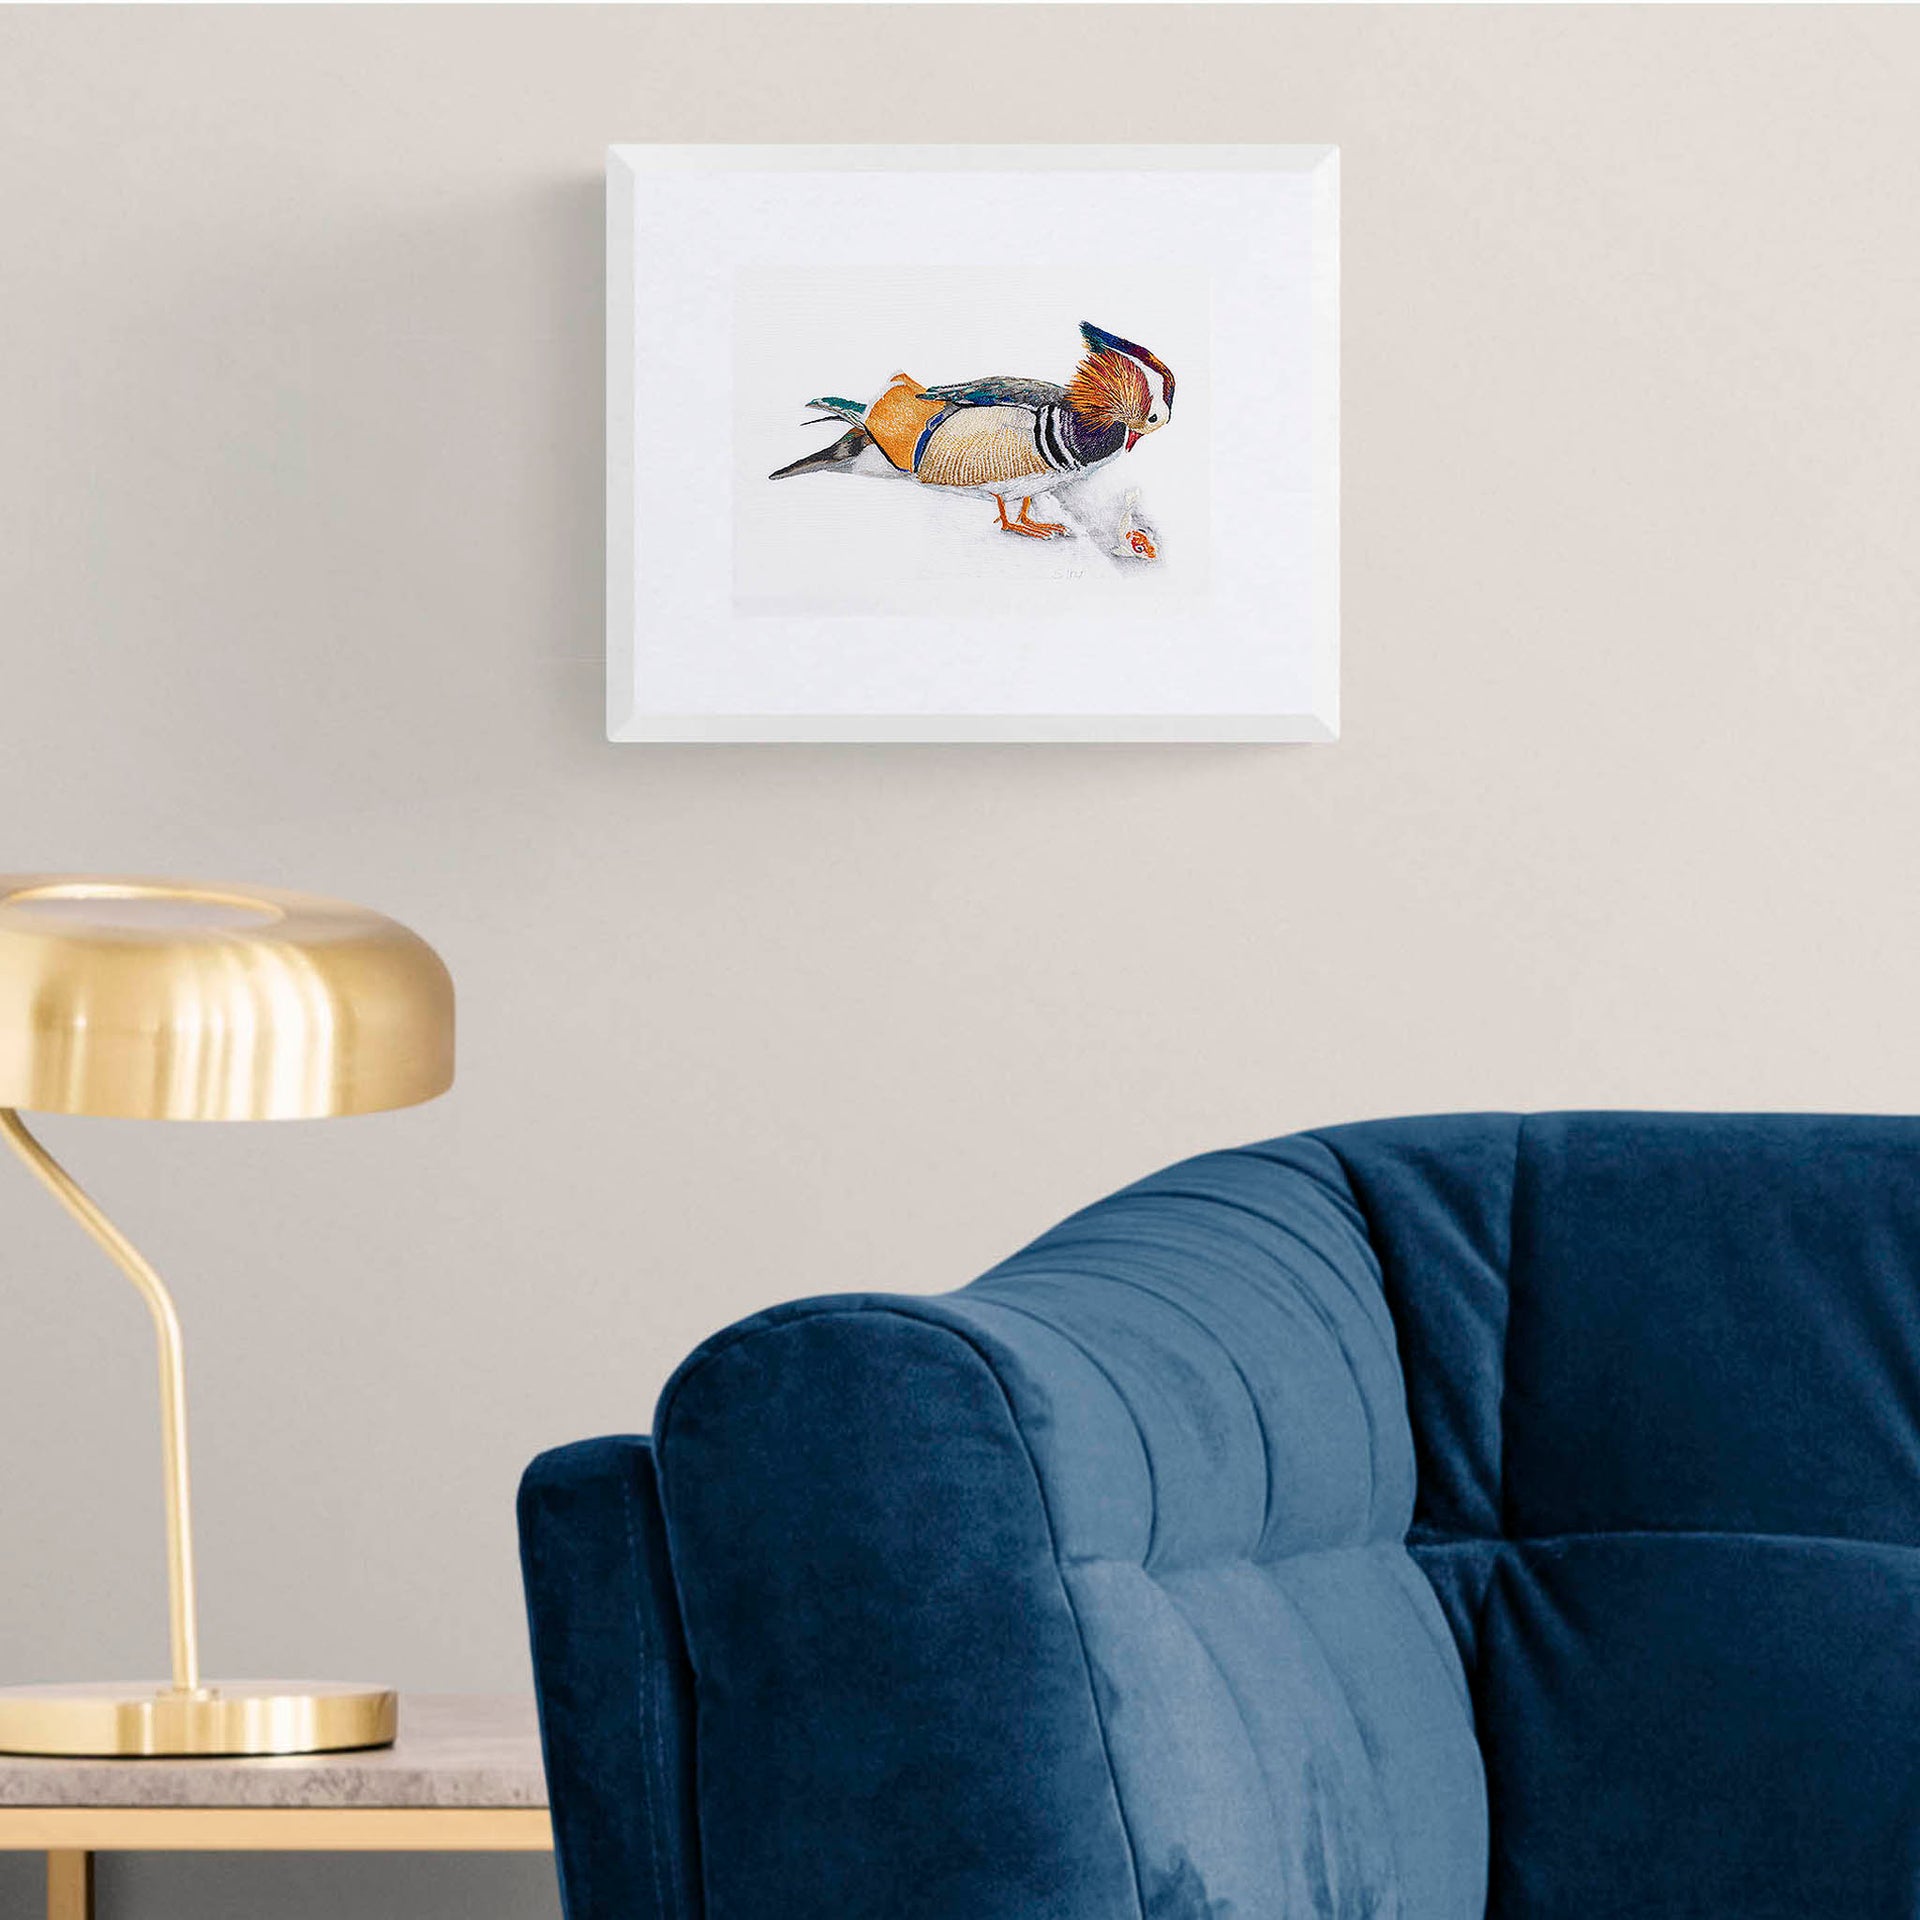 Mandarin duck hand embroidered limited edition print in frame on the wall